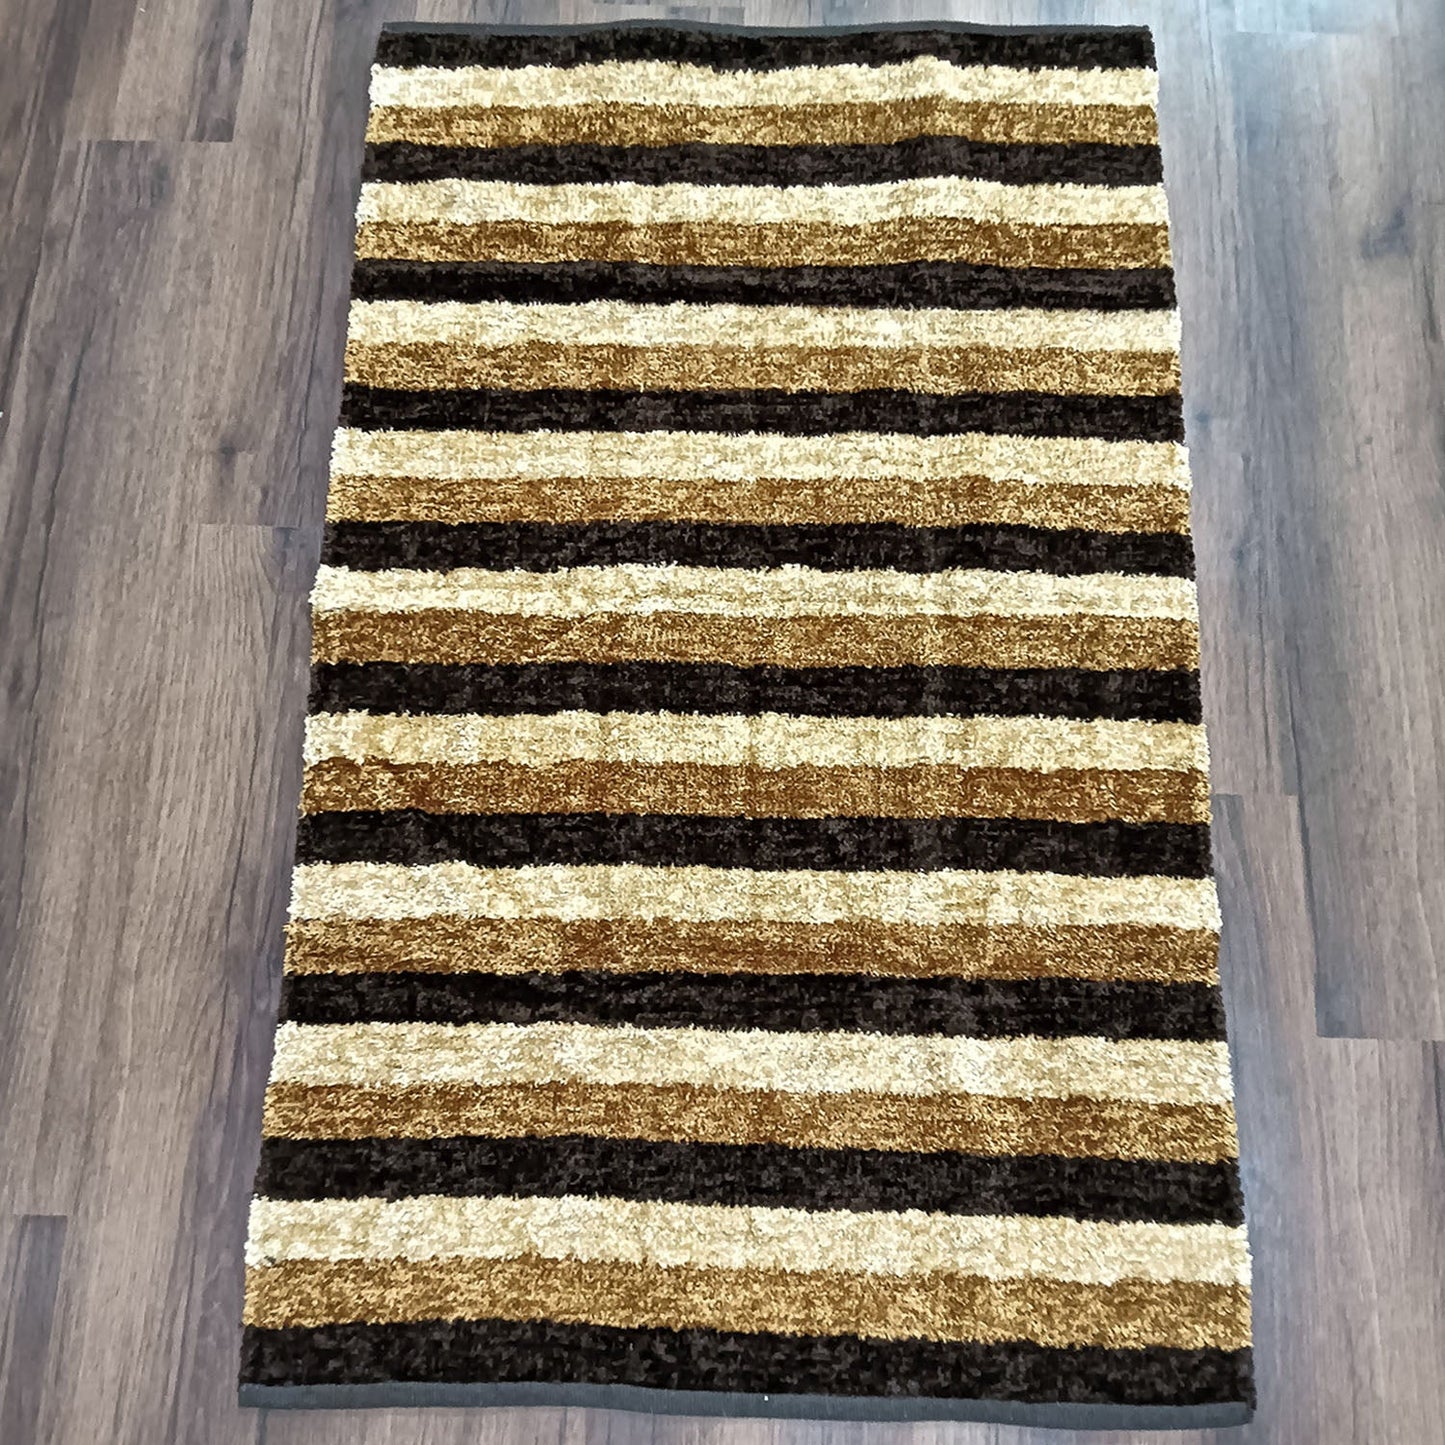 Avioni Handloom Cut Shuttle Rugs by Master Artisans | Feather like Luxurious Silk Soft Touch | Home Washable | Black, Beige Gold and White | Reversible - 3 feet x 5 feet (~90 cm x 150 cm)